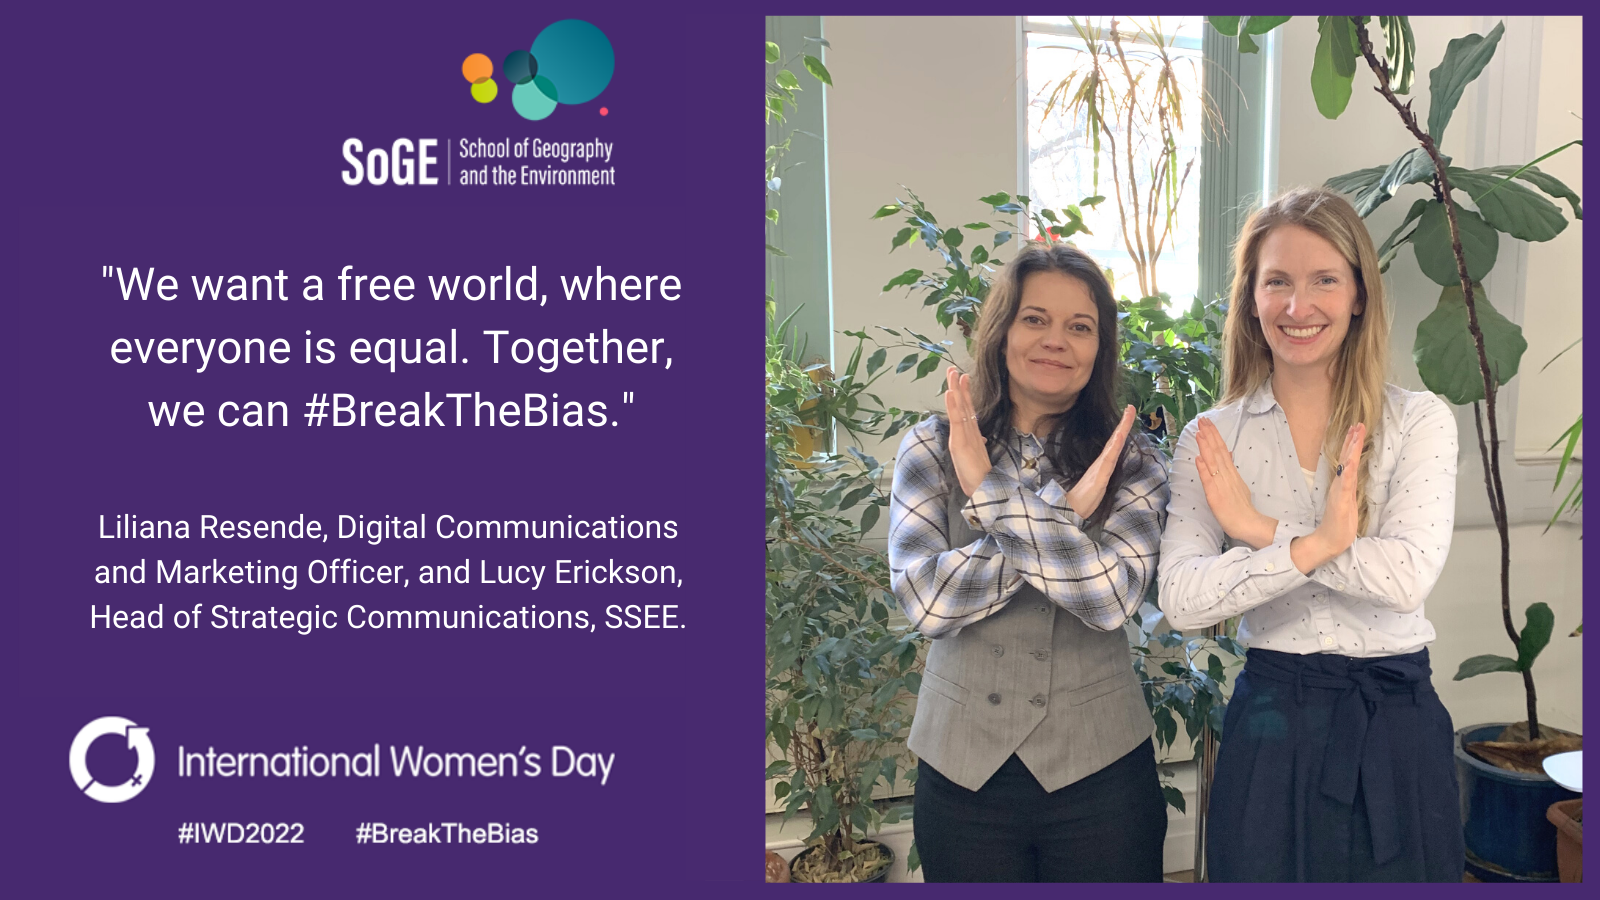 'We want a free world, where everyone is equal. Together we can #BreakTheBias.' Liliana Resende, Digital Communications and Marketing Officer, and Lucy Erickson, Head of Strategic Communications, SSEE.